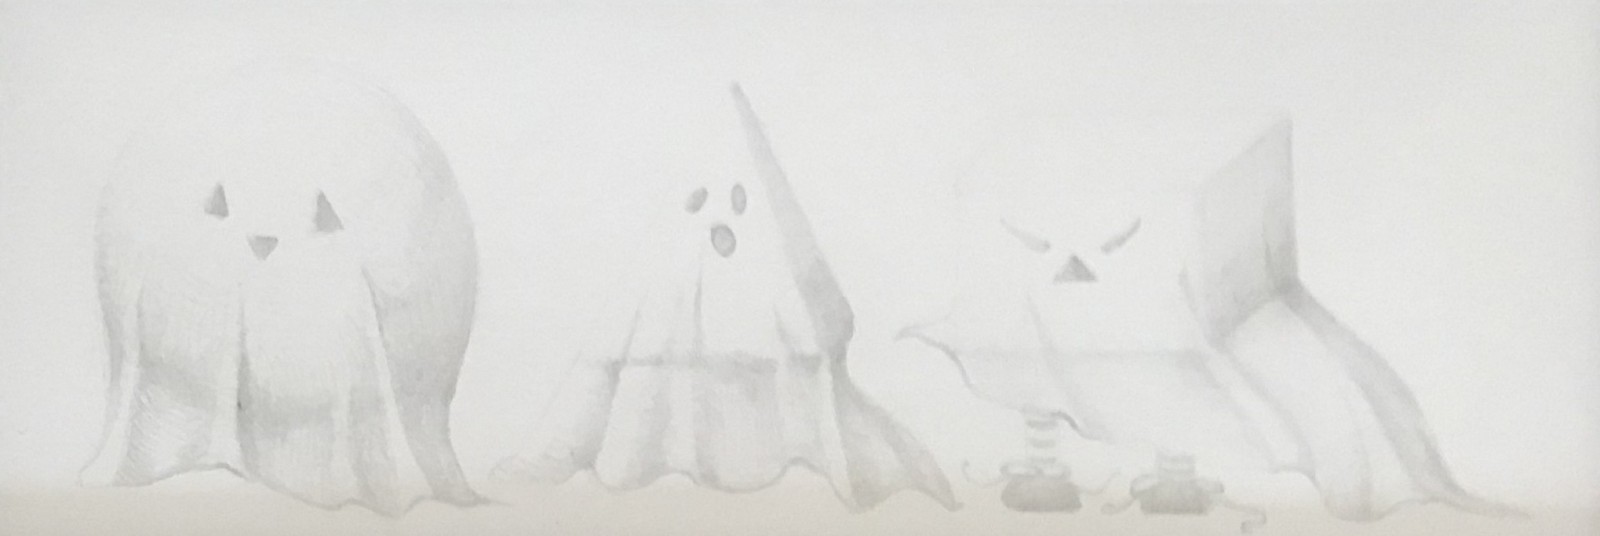 Laurel B. Friedmann, Simple Shapes Trick or Treating
pencil on paper, 3 1/2" x 9"
unsigned
MR 0819.13
$200